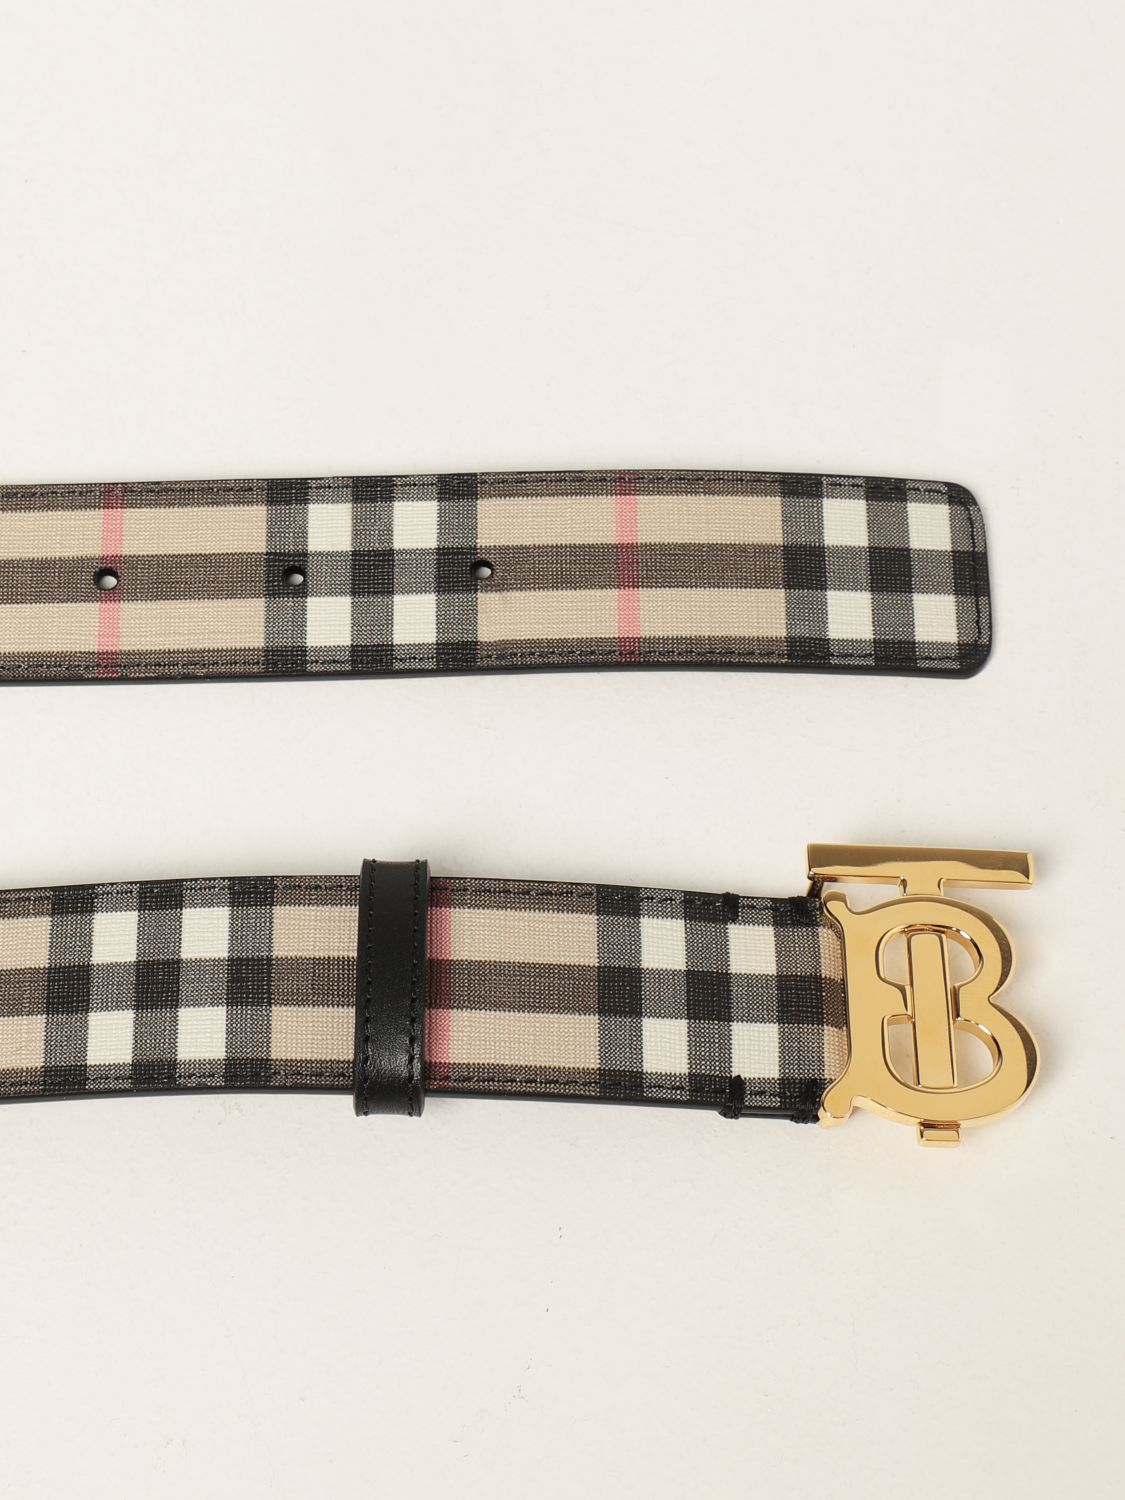 Cloth belt Burberry Beige size 90 cm in Cloth - 25912194